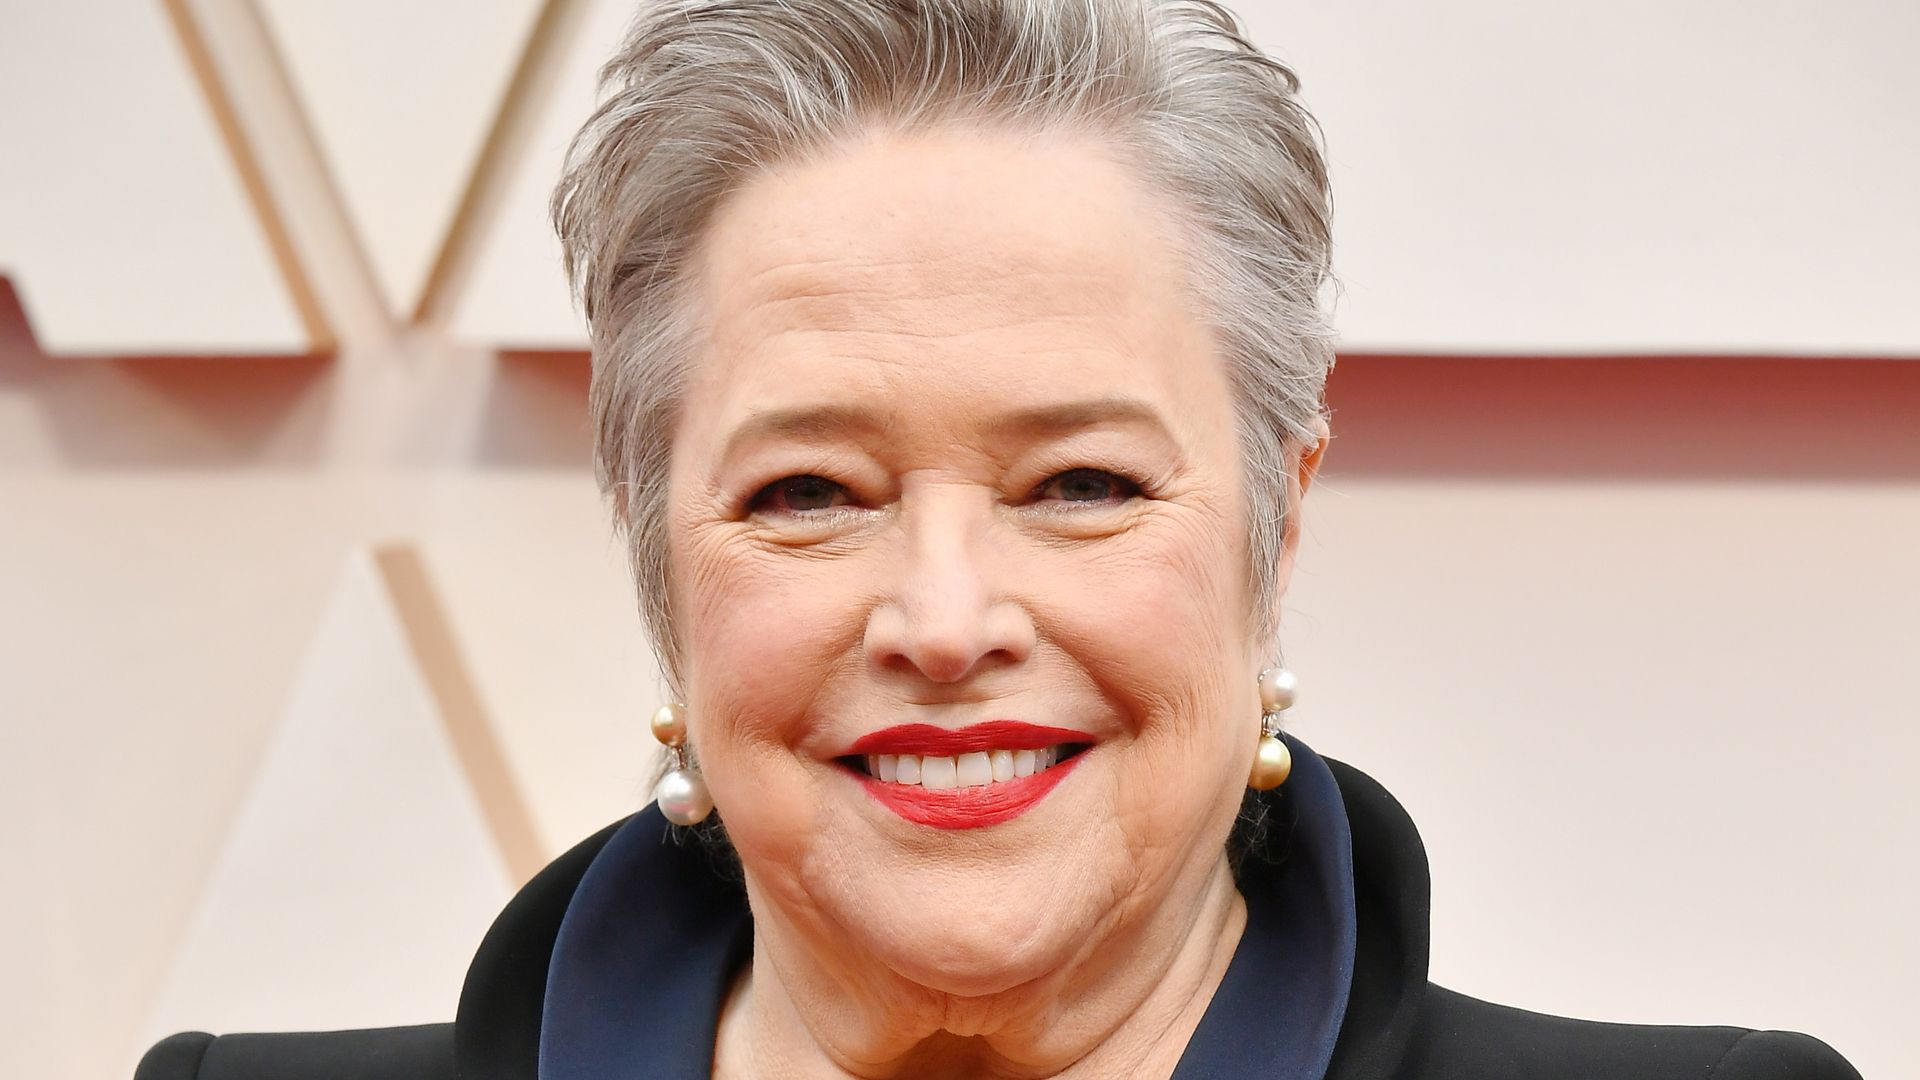 Kathy Bates smiling on the Oscars red carpet